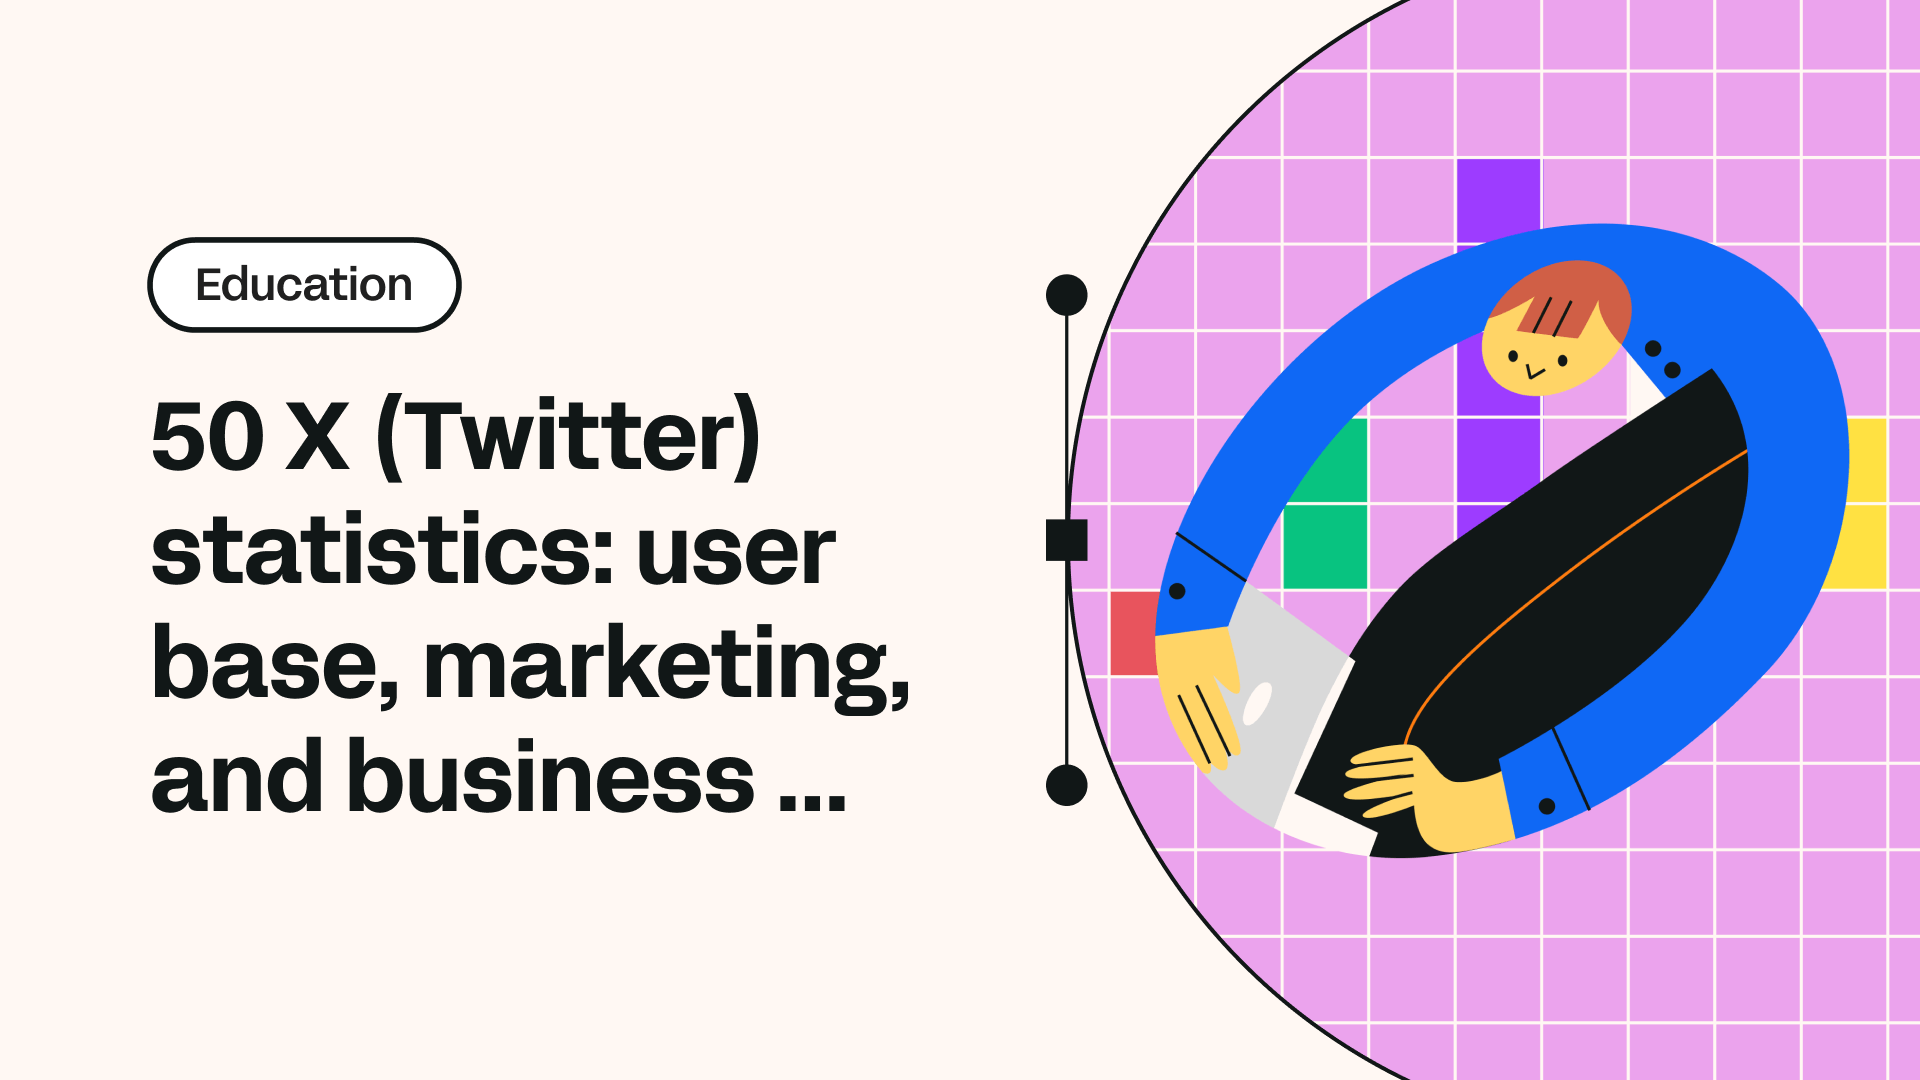 50 X (Twitter) statistics: user base, marketing, and business perks | Linearity